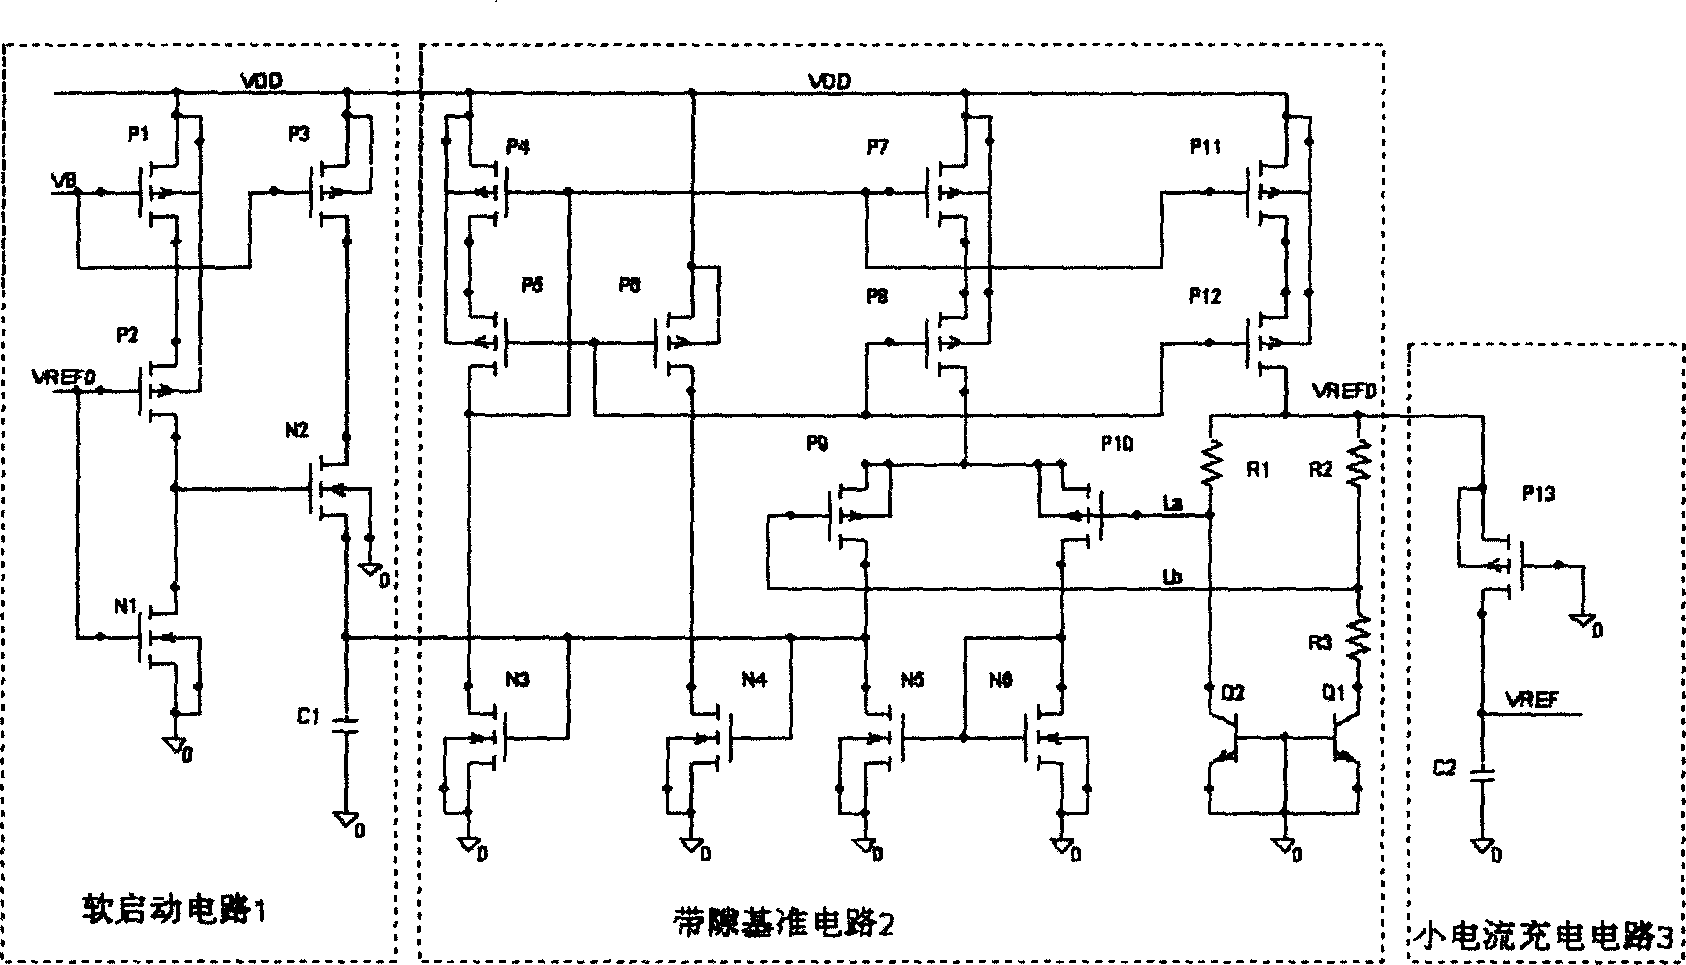 Voltage reference circuit of pulse width modulation